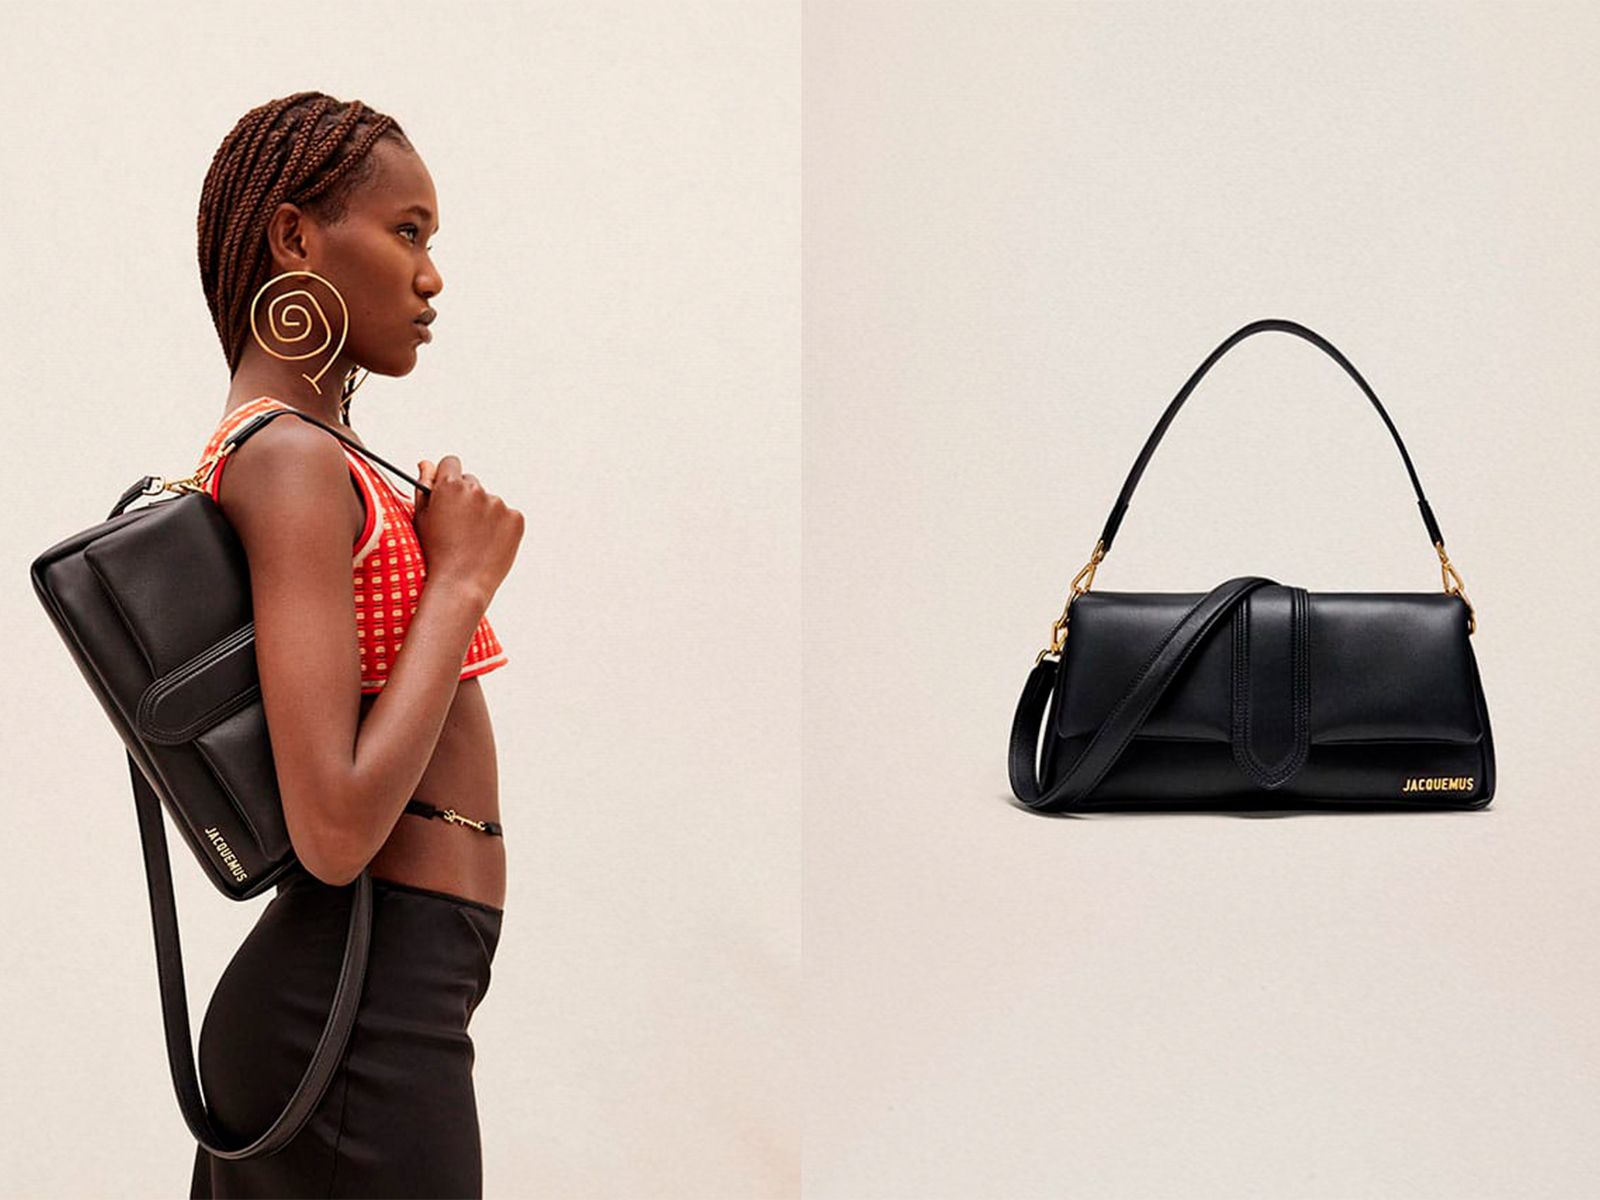 The ‘Bambimou’ by Jacquemus is this spring’s it-bag